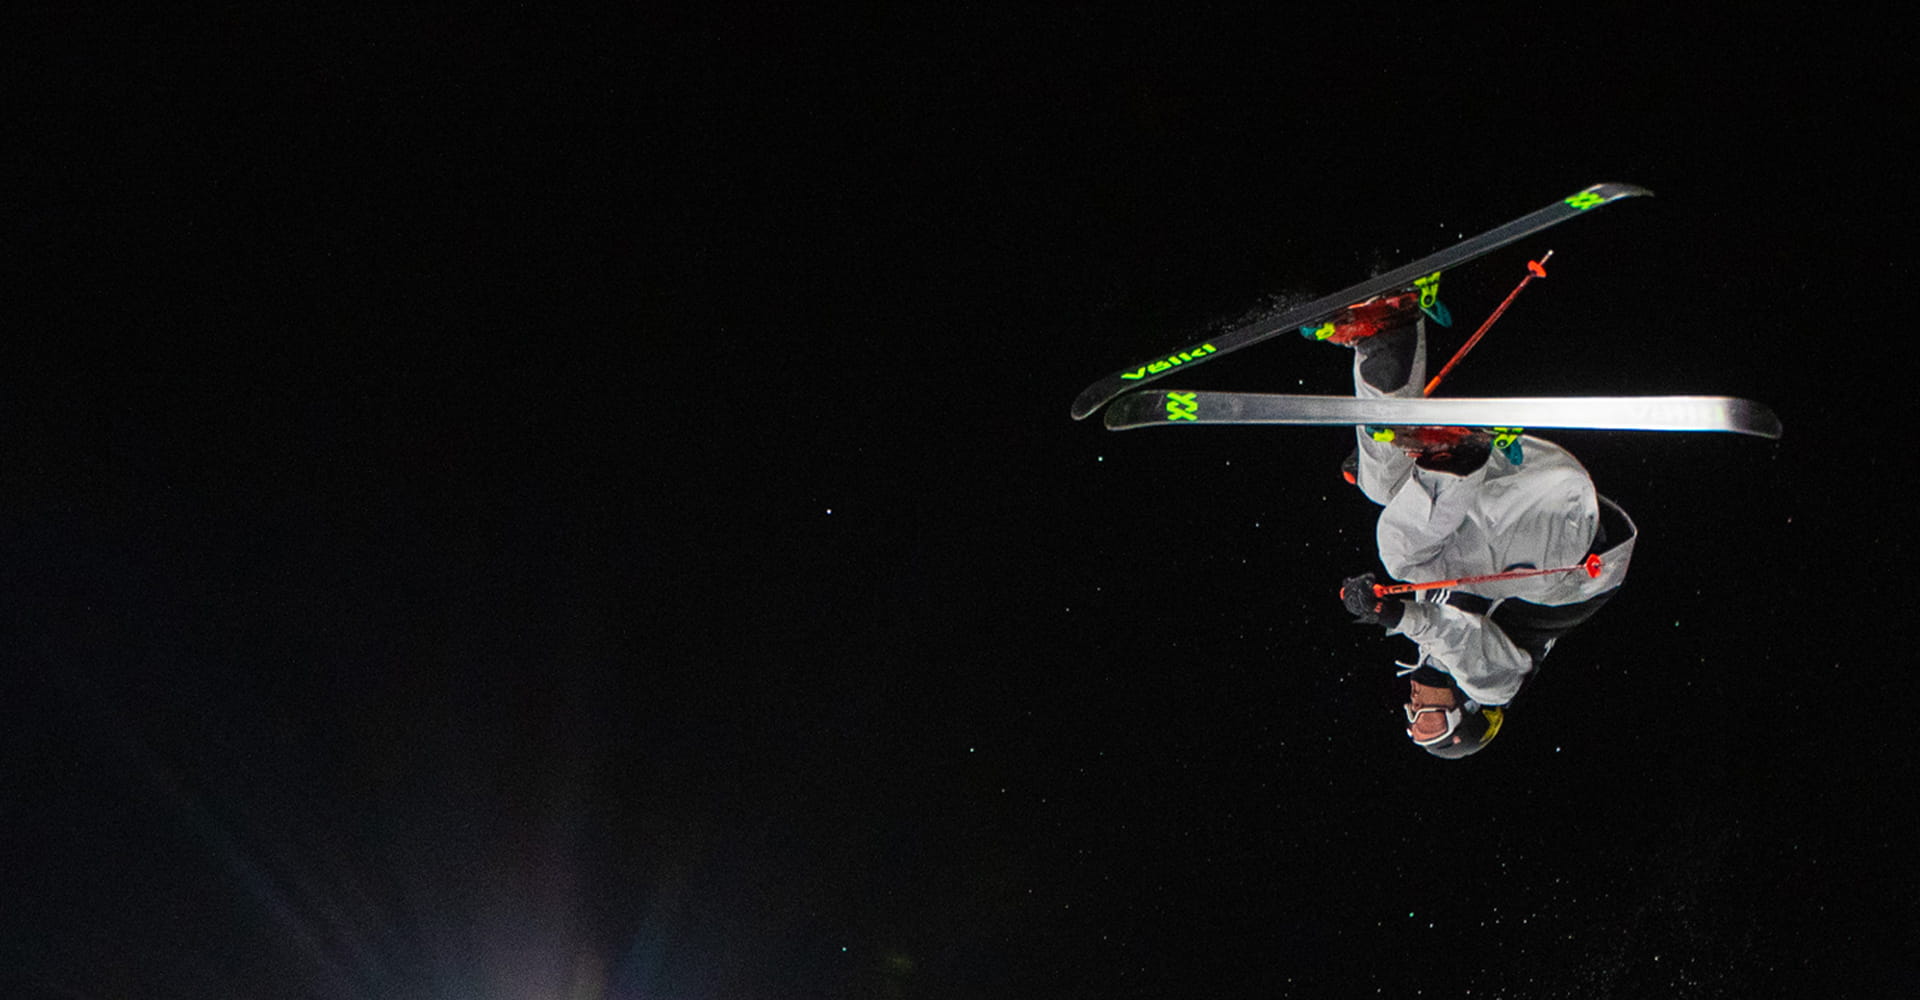 Halfpipe skier doing an aerial trick at X Games Aspen